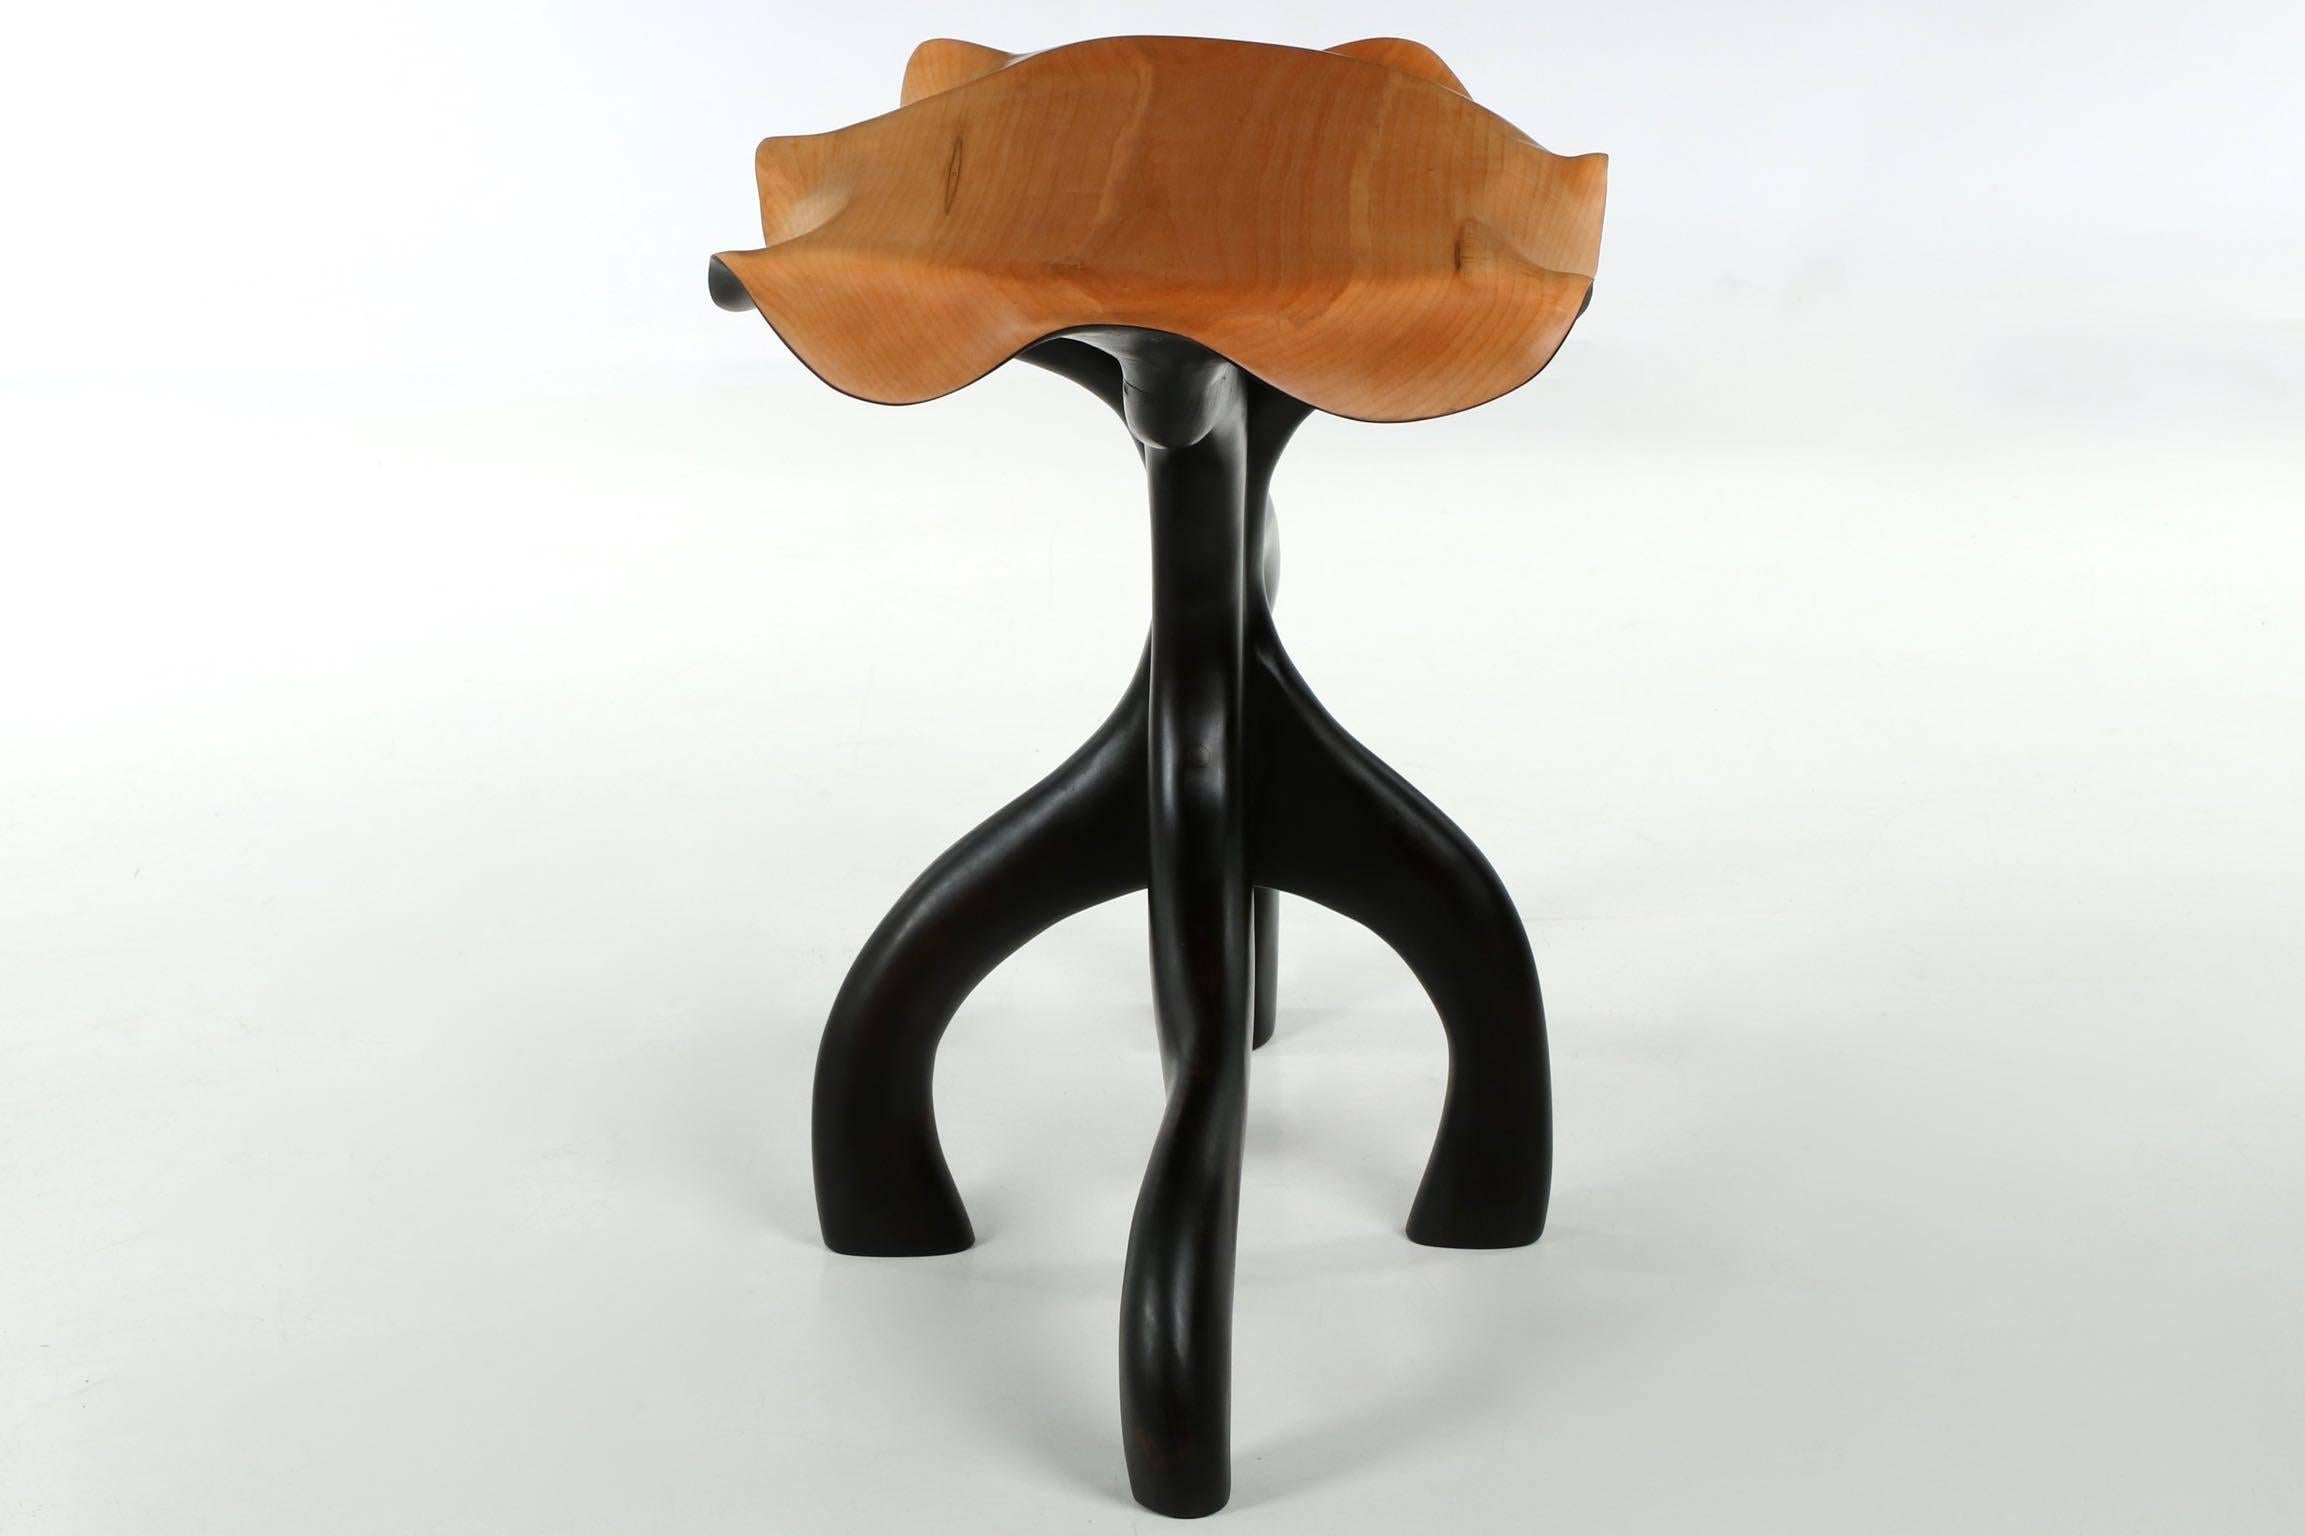 American Exceptional Organic Modern Sculpted Poplar and Ebonized Maple Side Table